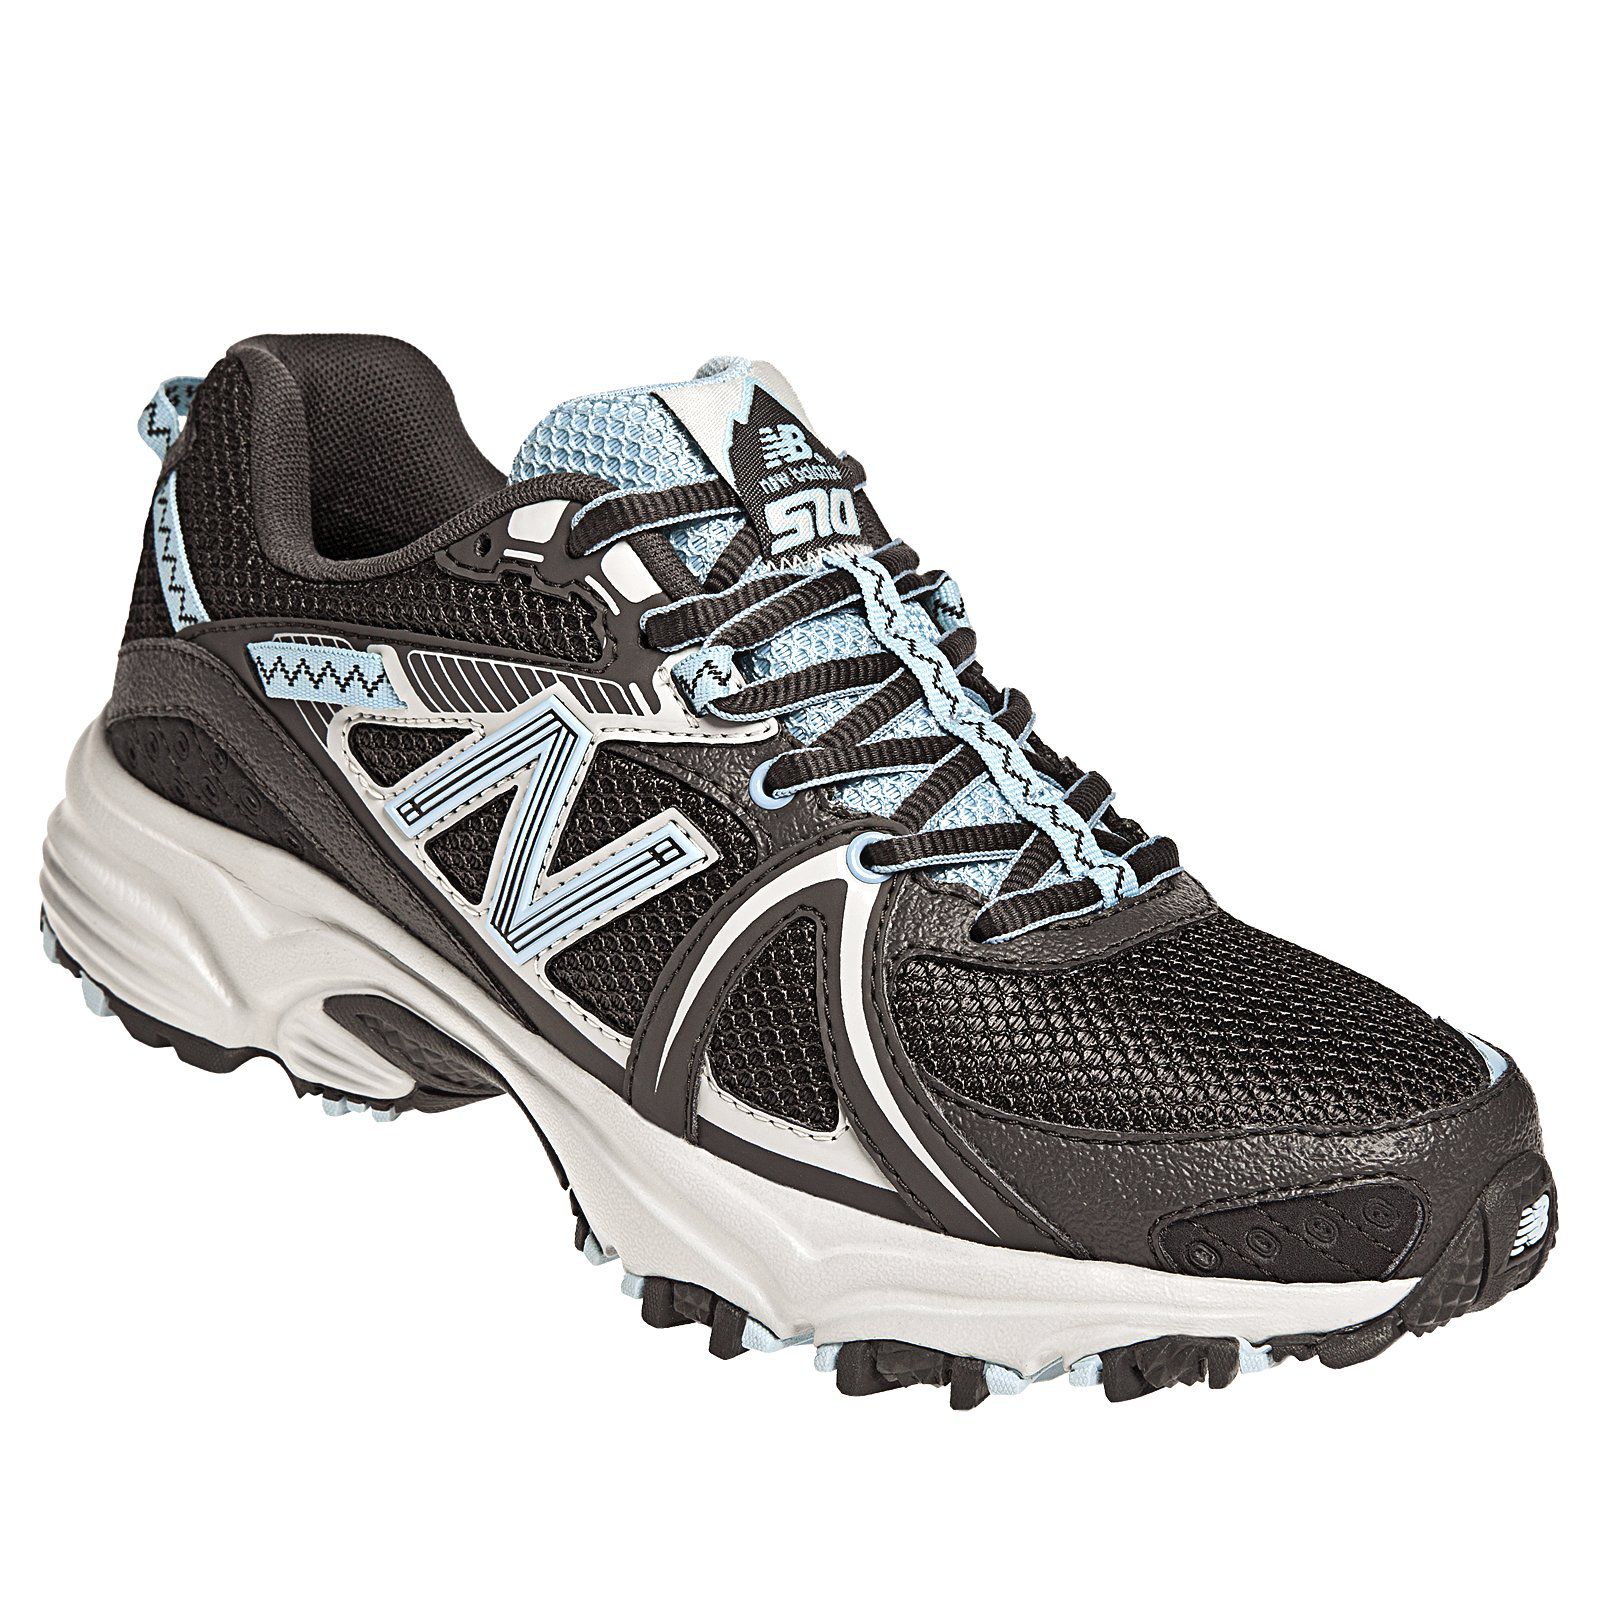 New Balance Women's 510 Trail Running Athletic Shoe Wide Avail - Black/Blue